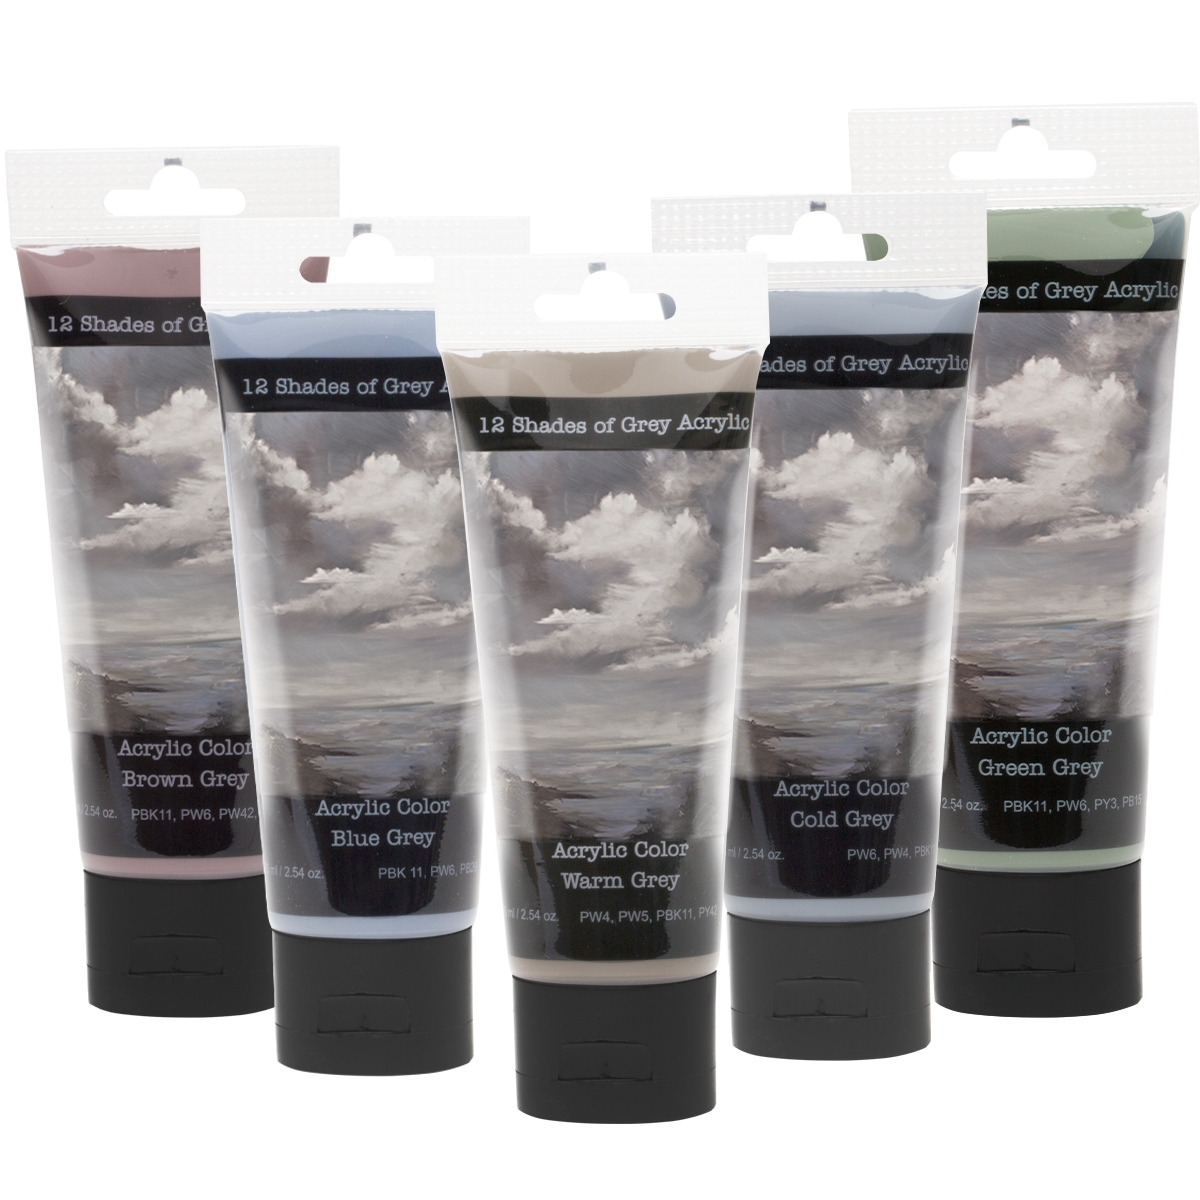 12 Shades Of Grey Acrylic Paint Colors - 75ml Tubes